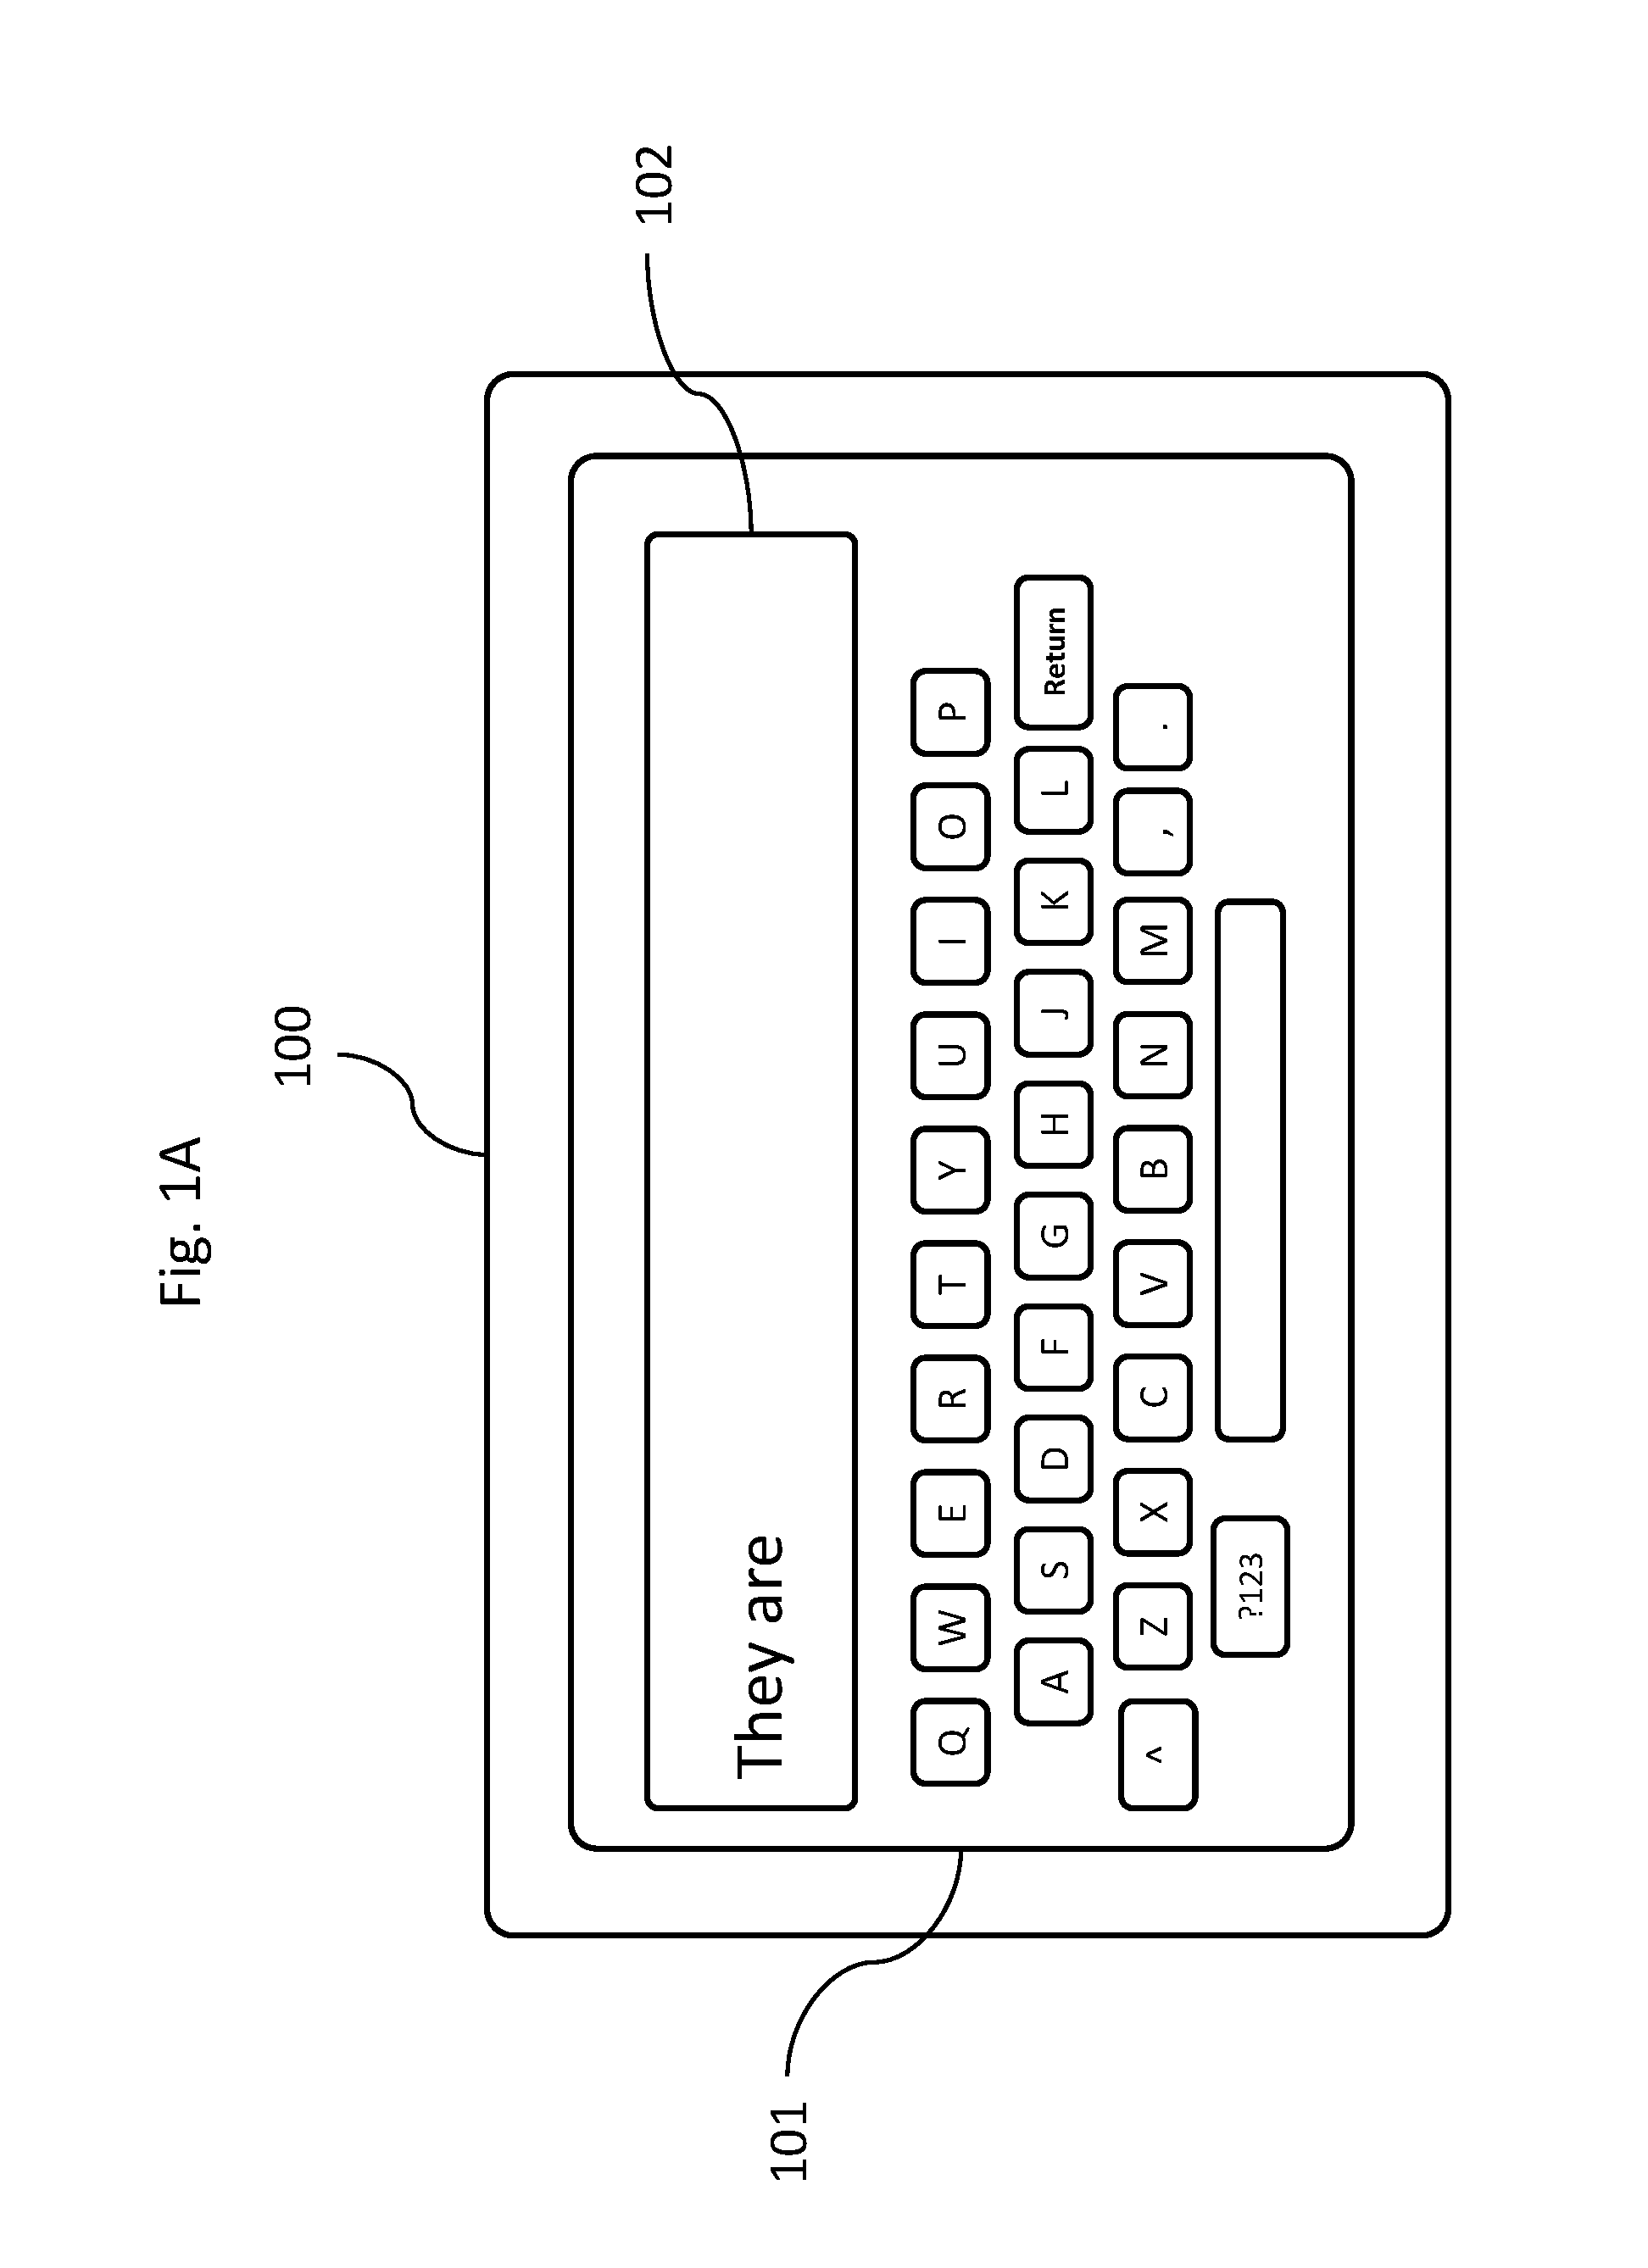 Virtual keyboard text entry method optimized for thumb typing, using partial word completion key entry values